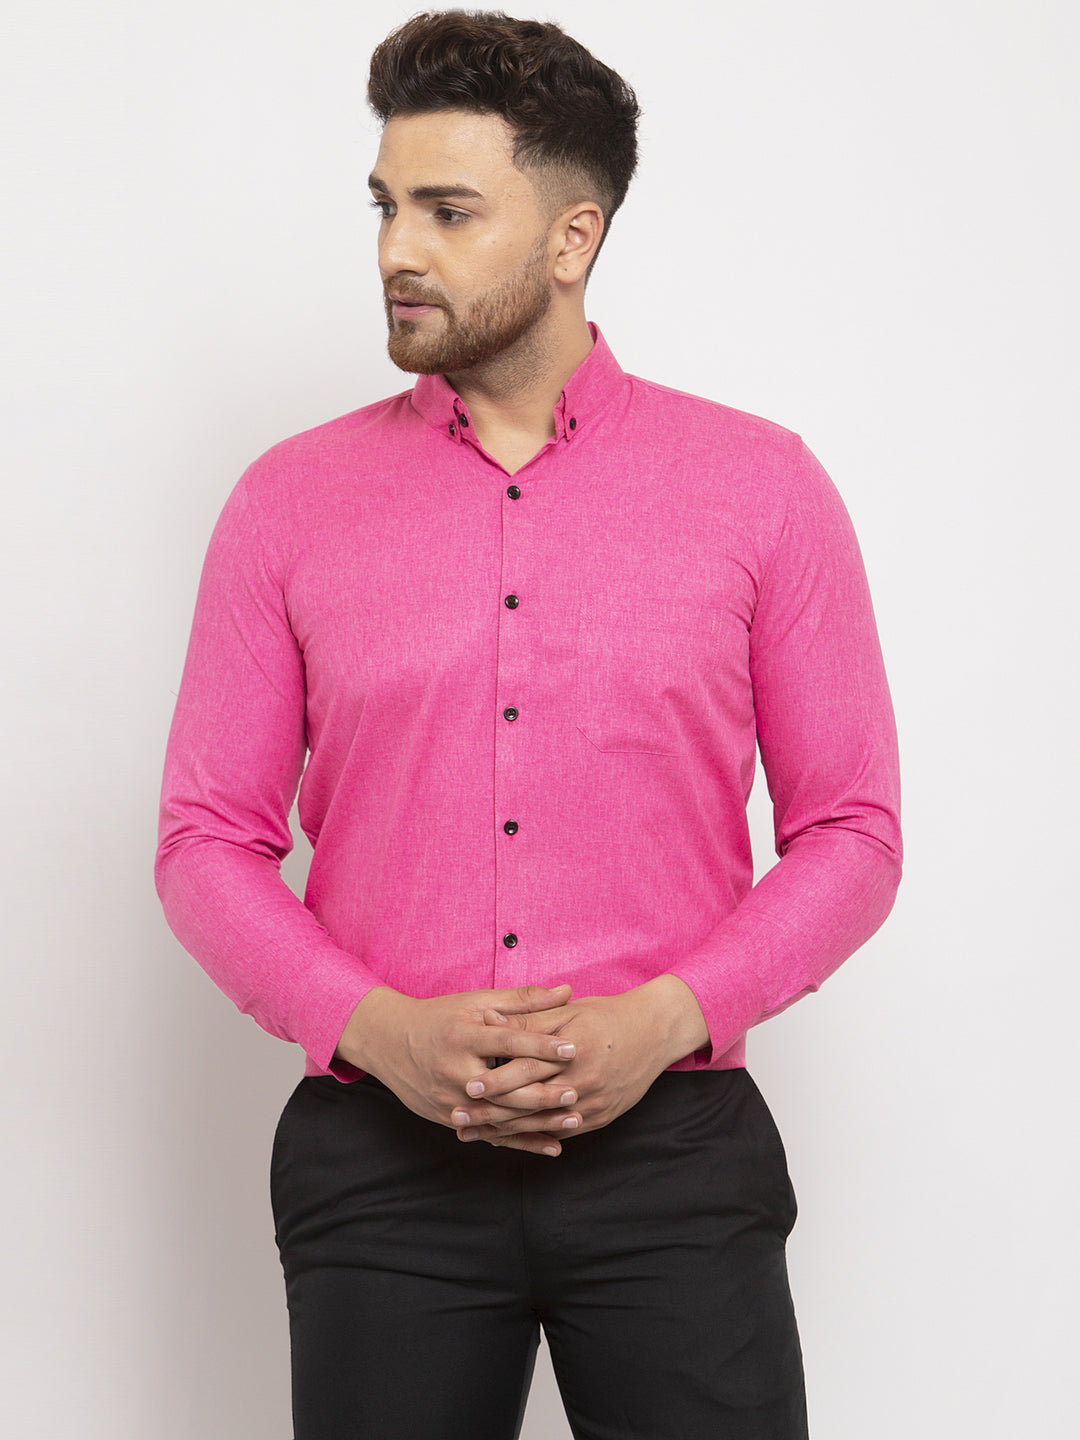 Men's Pink Cotton Solid Button Down Formal Shirts ( SF 734Pink ) - Jainish